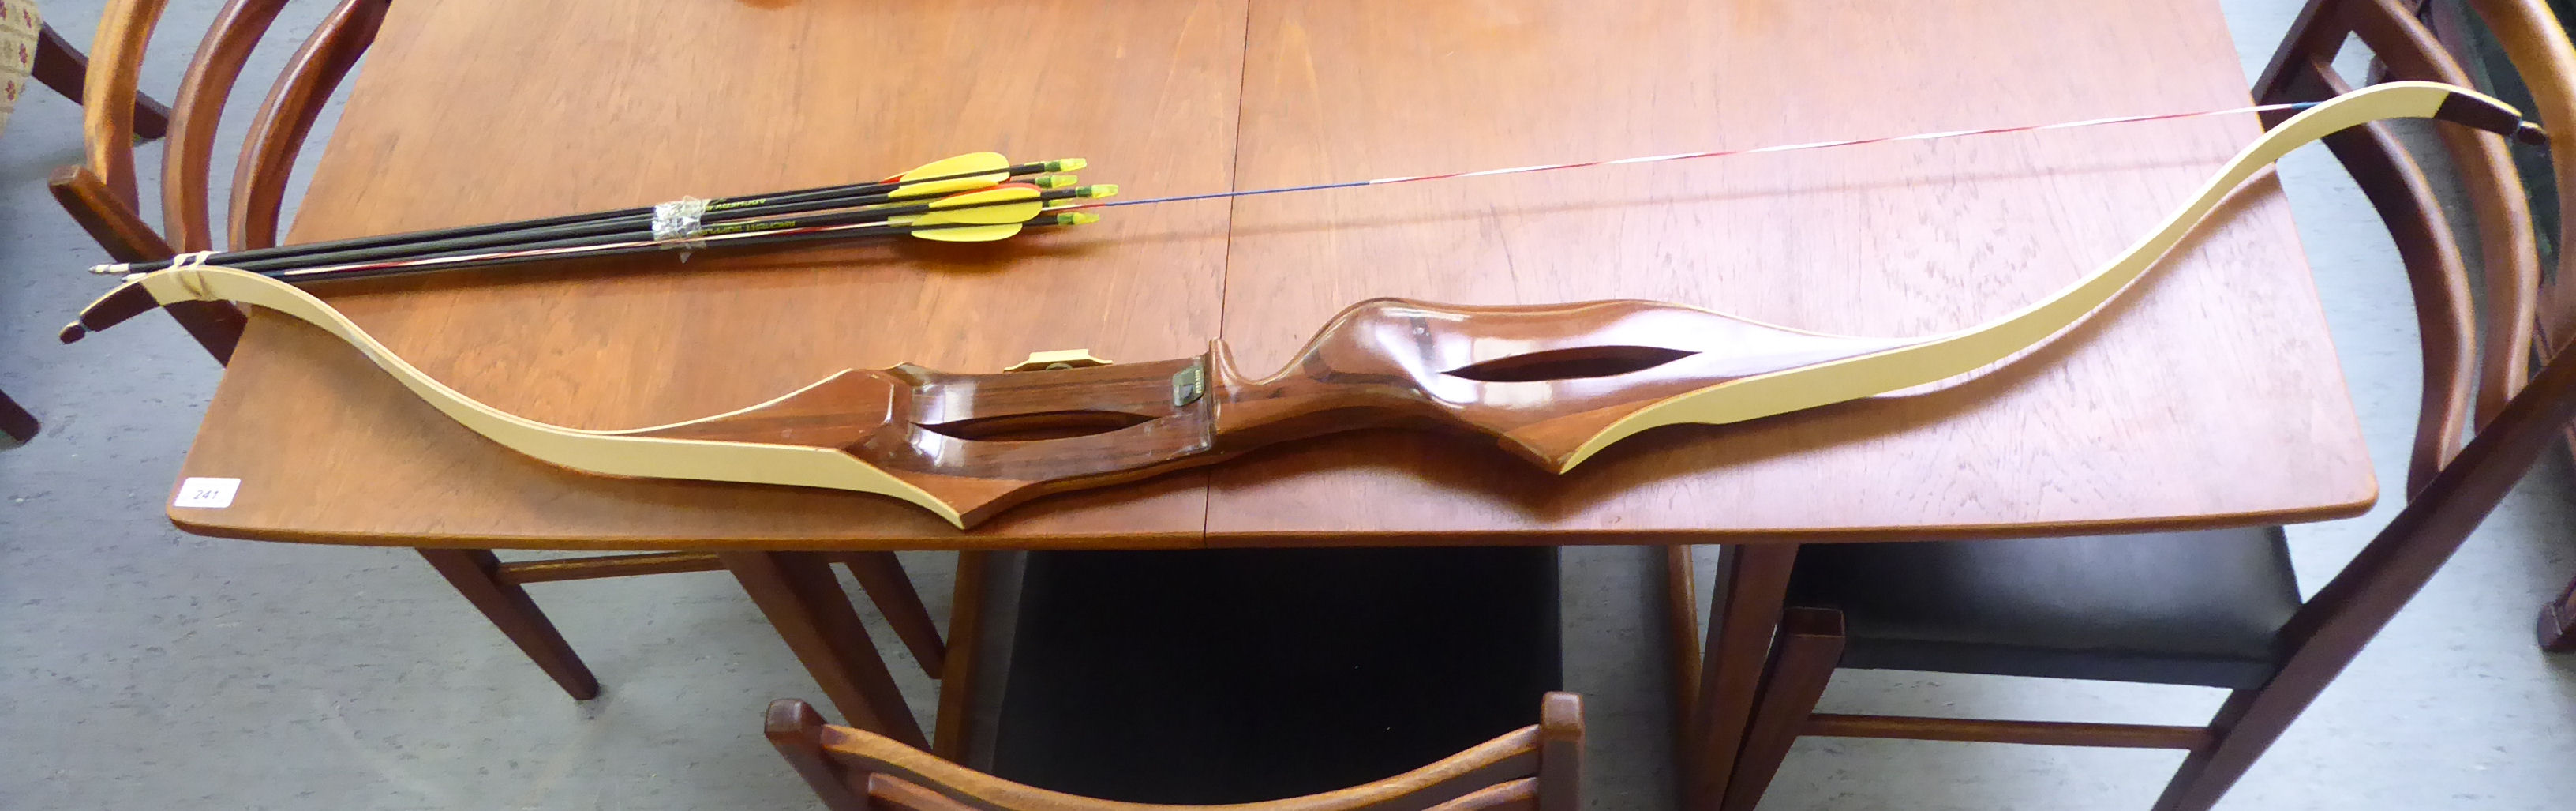 A Royal Stuart of Scotland walnut and resin archers bow, model no. - Image 3 of 3